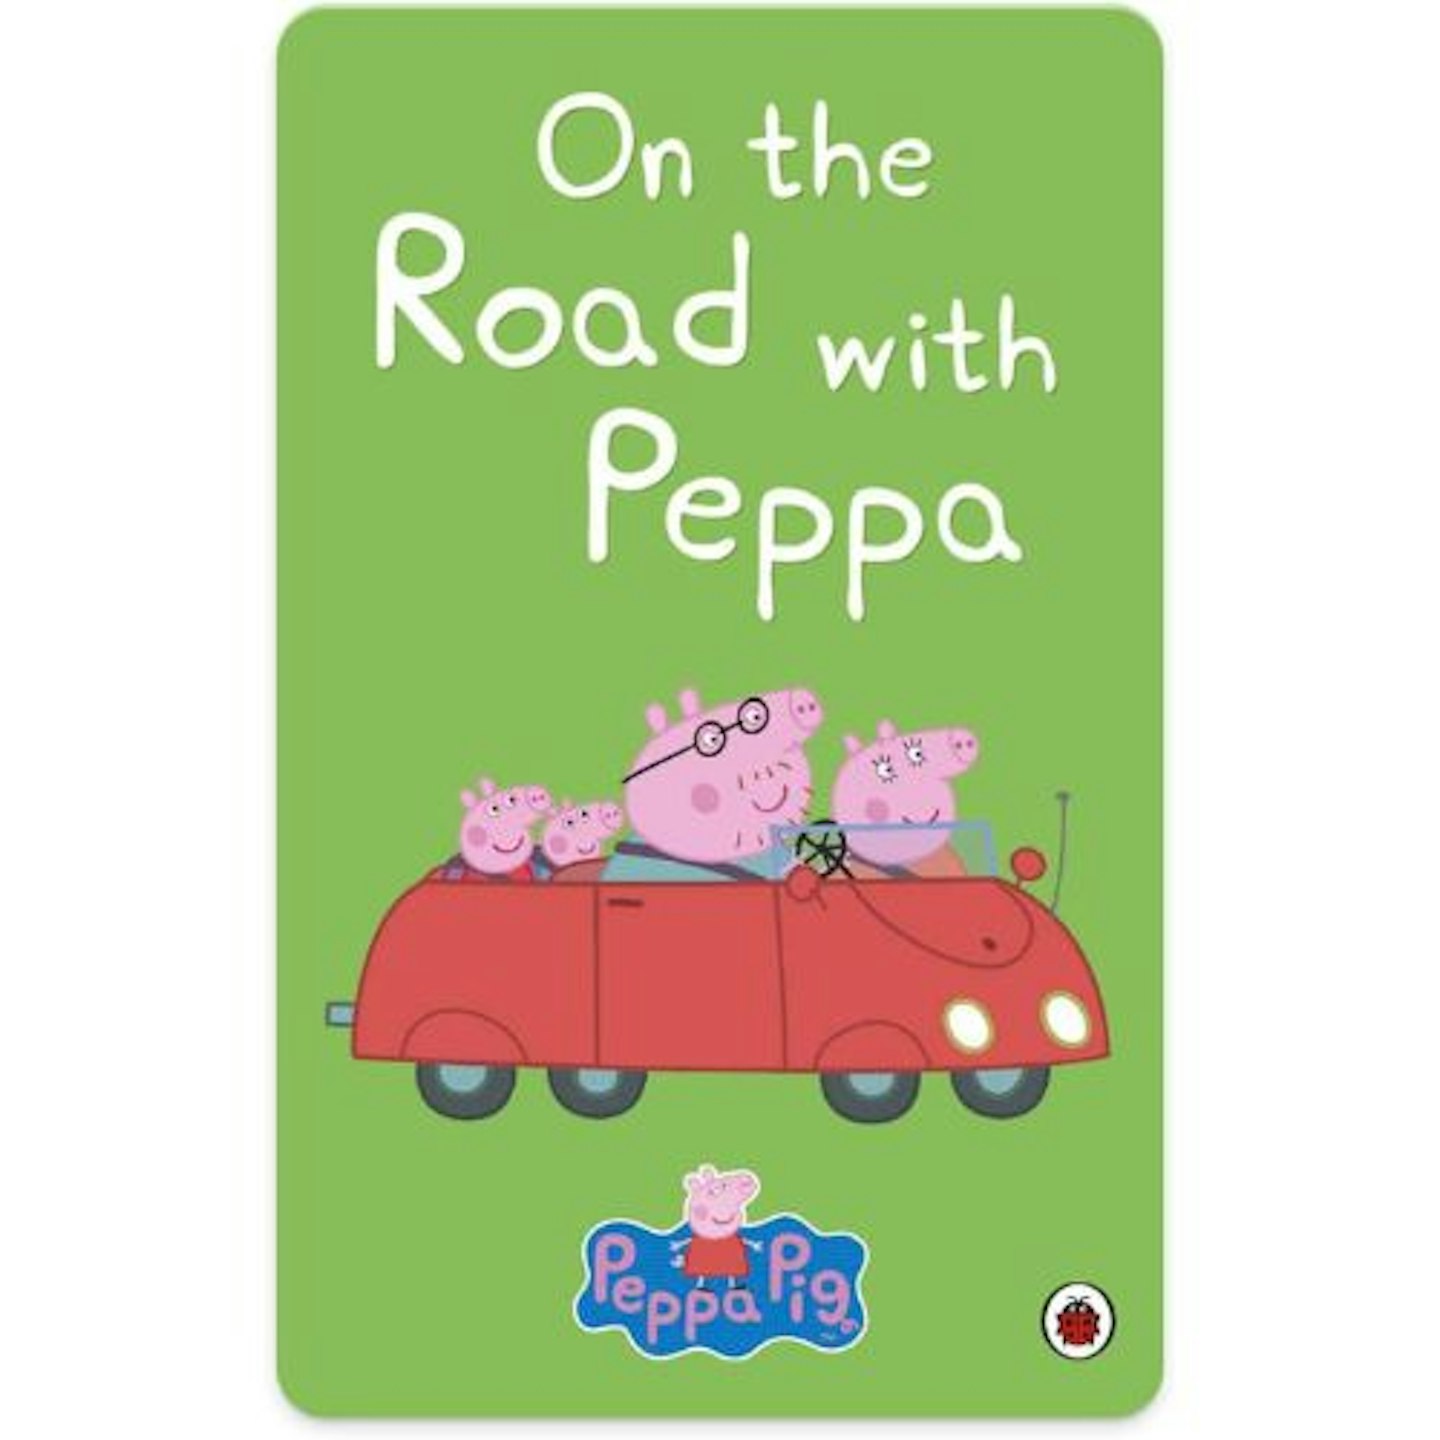 Best Yoto cards for toddlers On the Road with Peppa